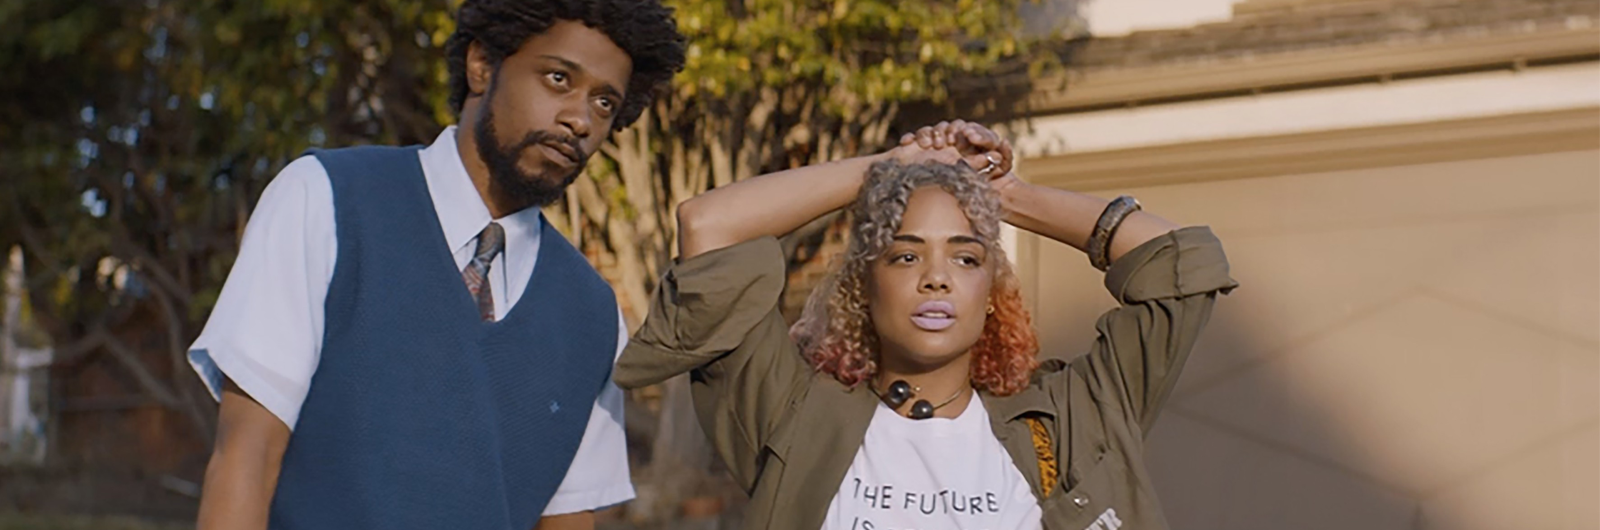 'Sorry To Bother You' Soundtrack Features Killer Mike, Janelle Monae, Lakeith Stanfield